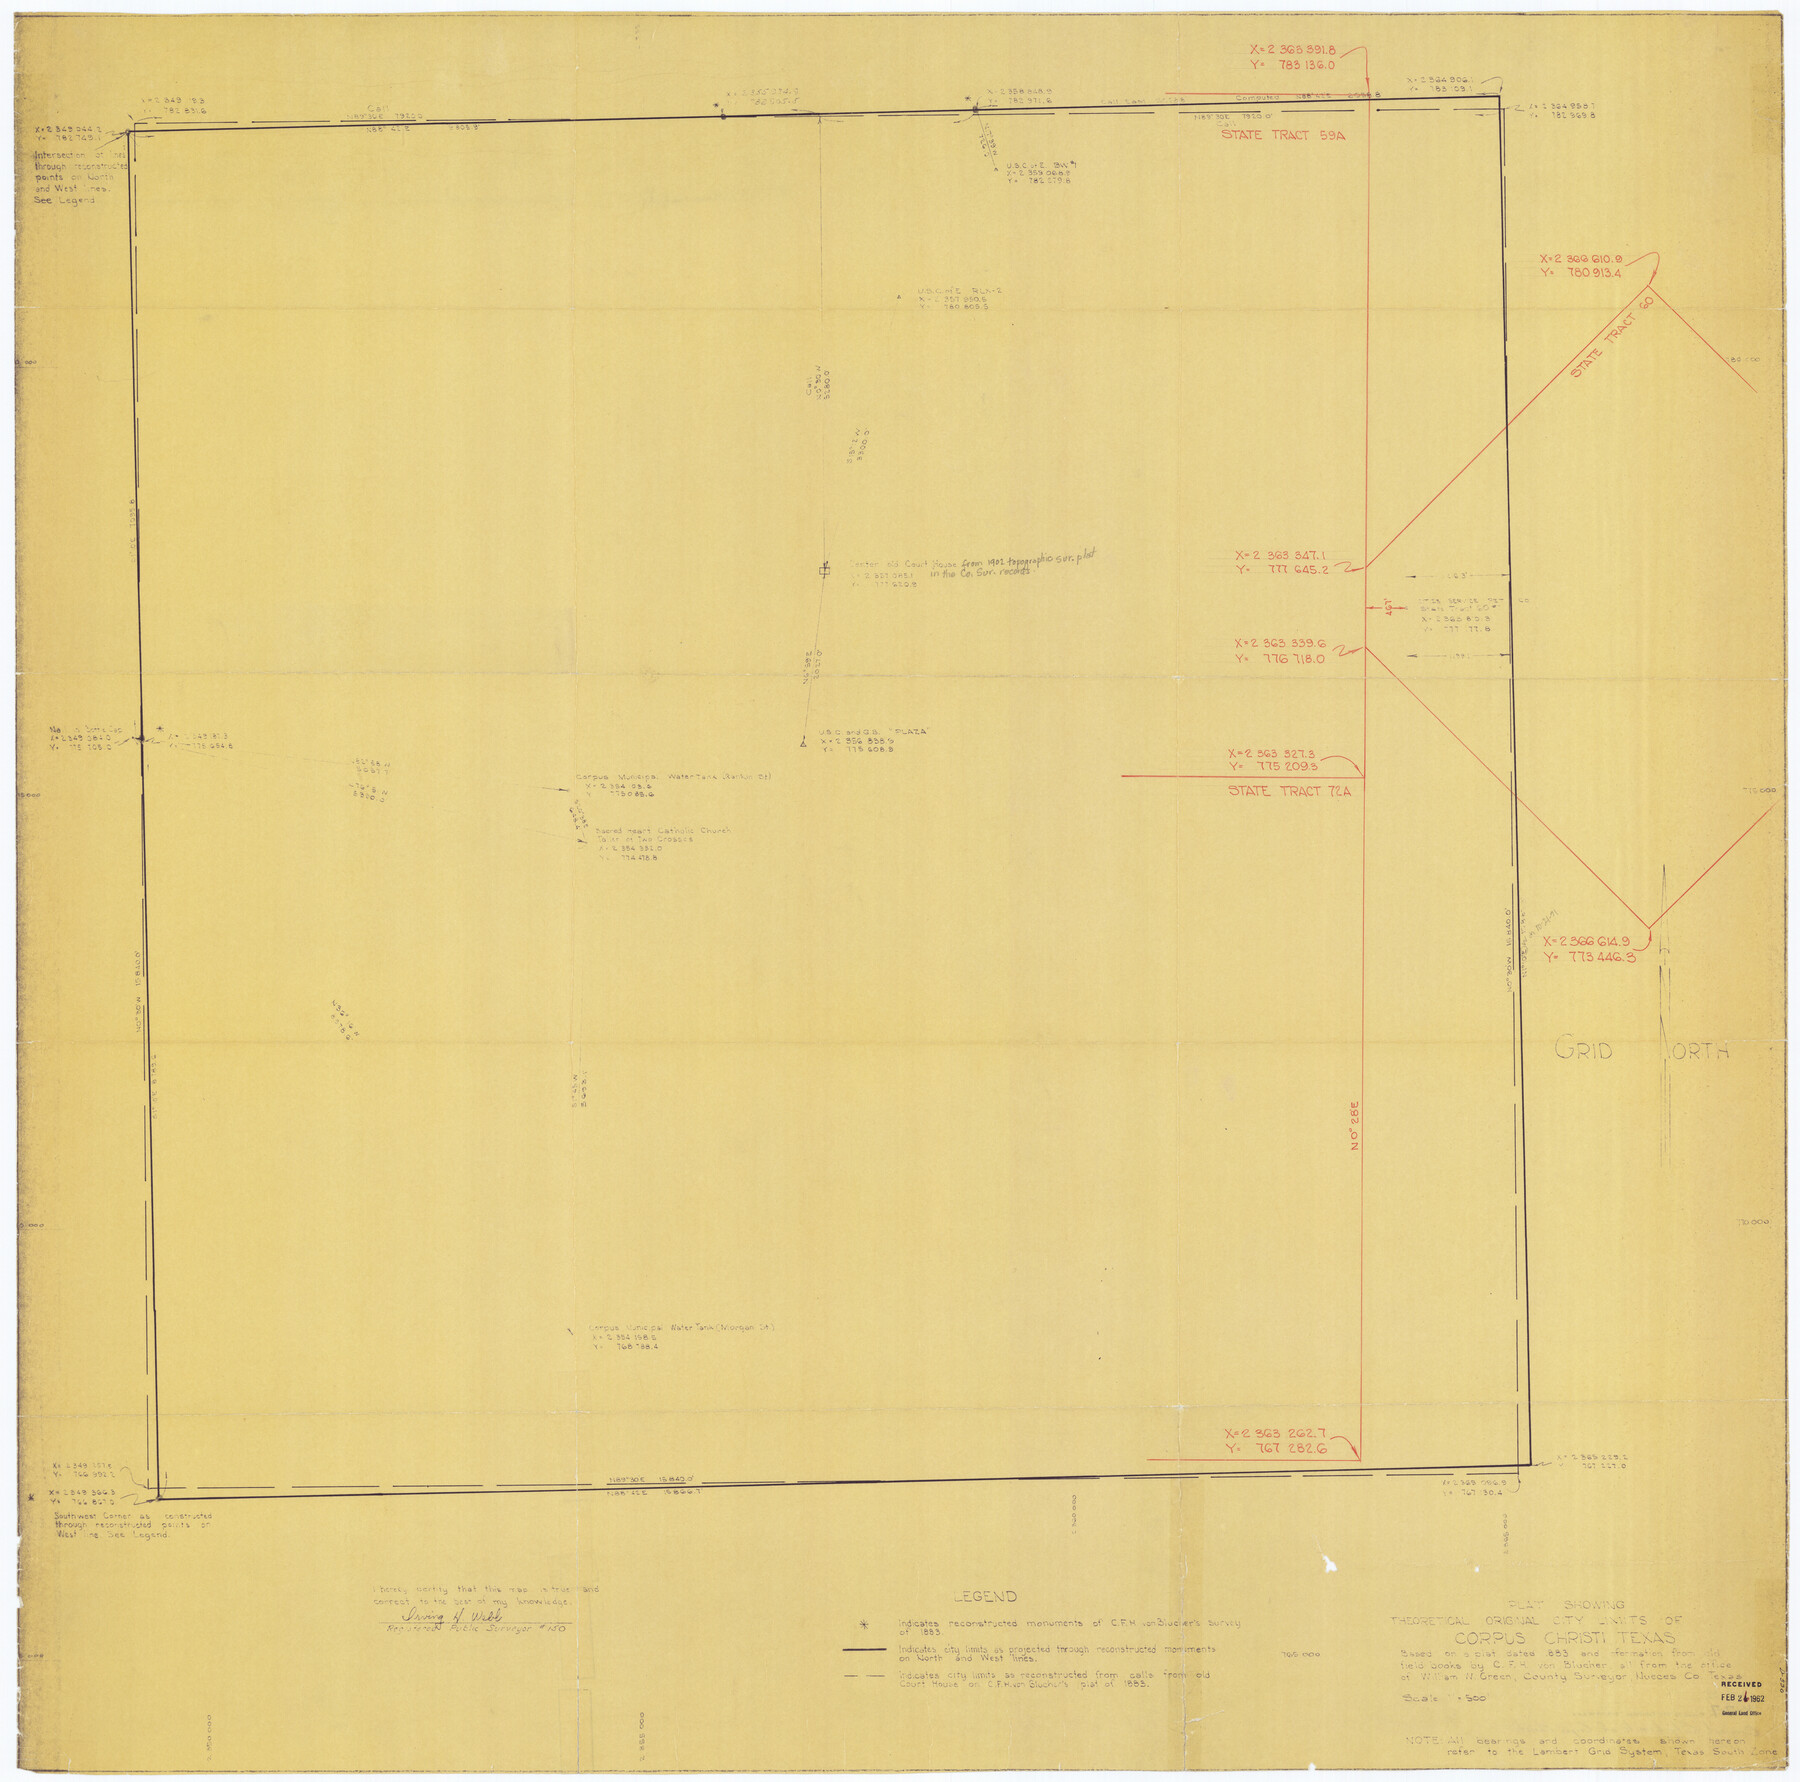 4838, Plat Showing Theoretical Original City Limits of Corpus Christi, General Map Collection